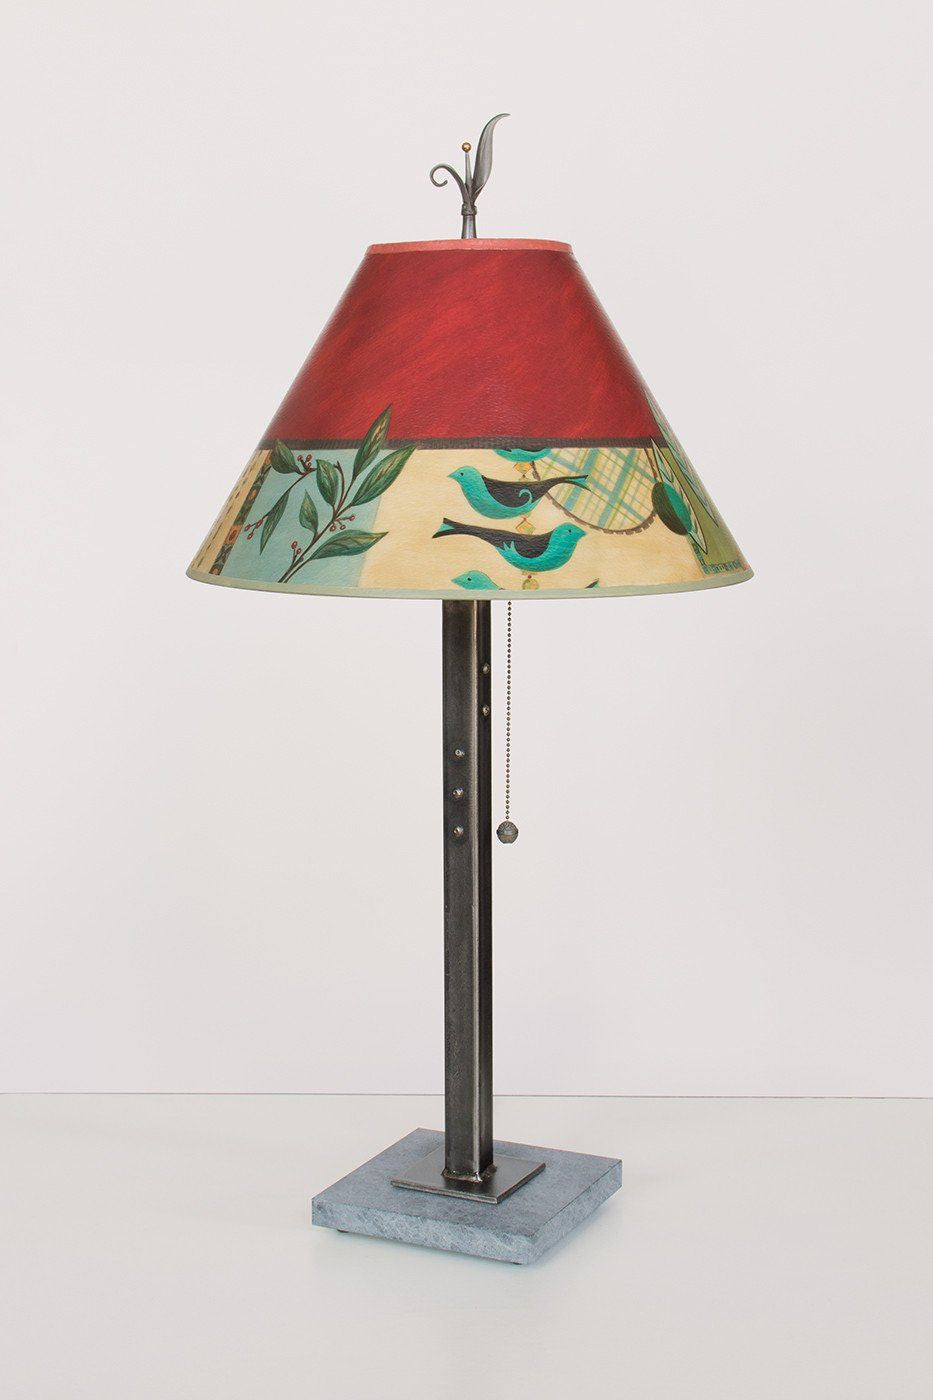 Steel Table Lamp on Marble with Medium Conical Shade in New Capri